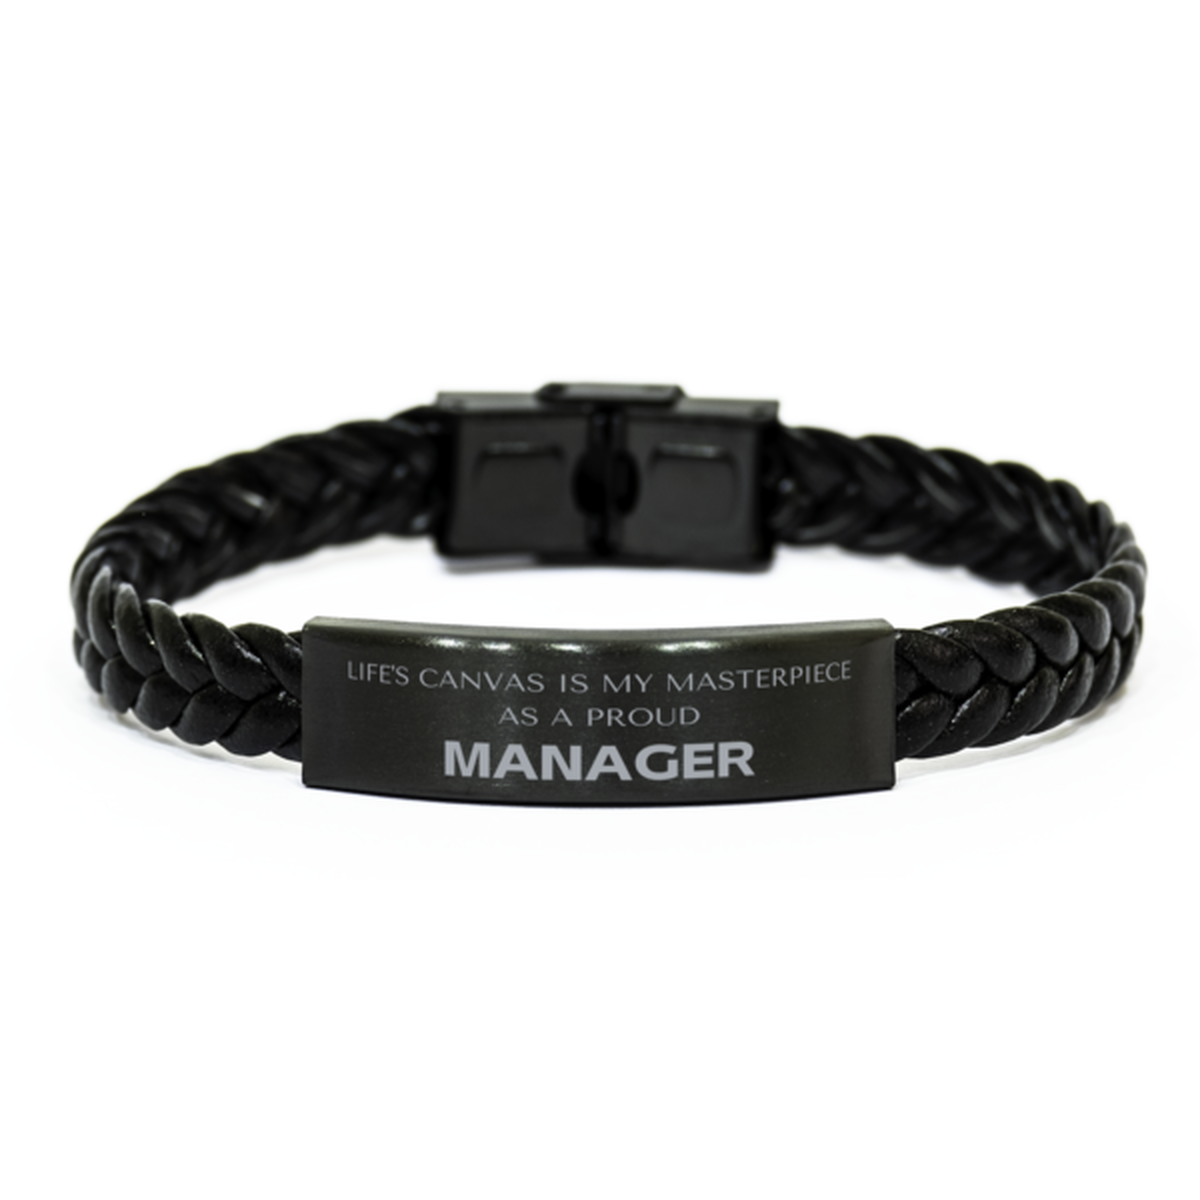 Proud Manager Gifts, Life's canvas is my masterpiece, Epic Birthday Christmas Unique Braided Leather Bracelet For Manager, Coworkers, Men, Women, Friends